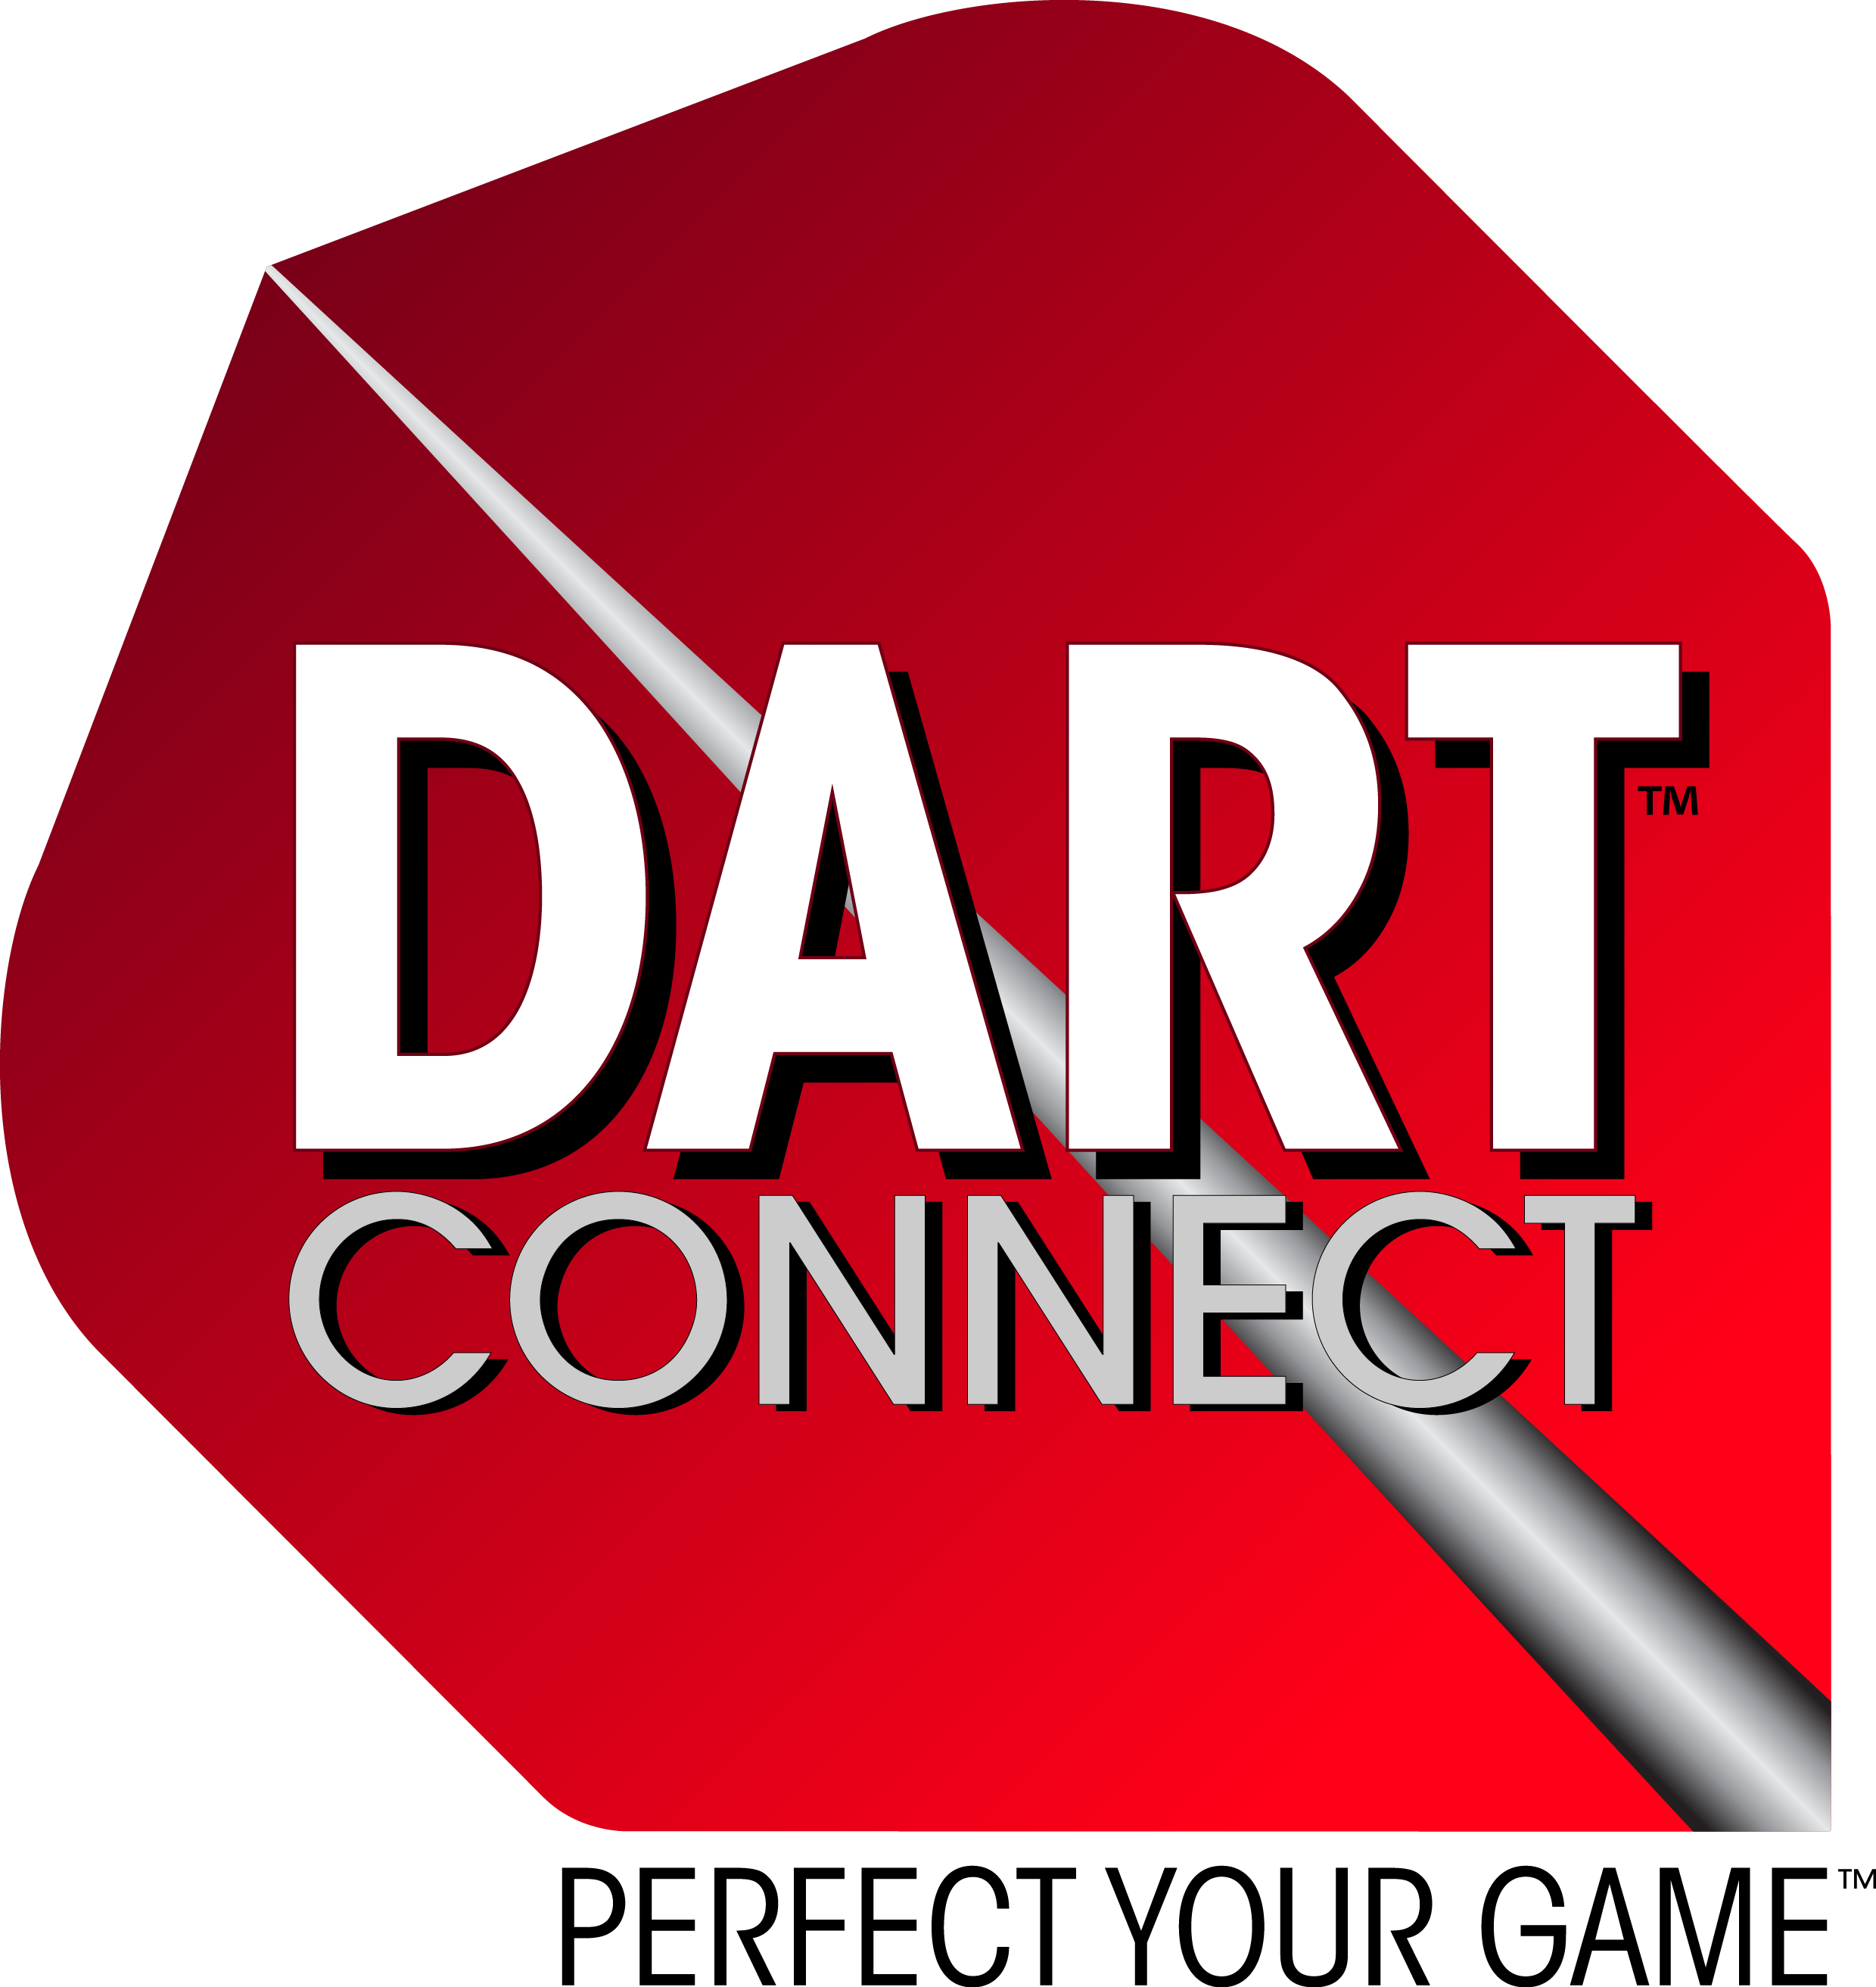 The premier software platform for steel-tip darts. Score. Track. Connect.  Casual play, leagues, tournaments, join DartConnect today and perfect your game!